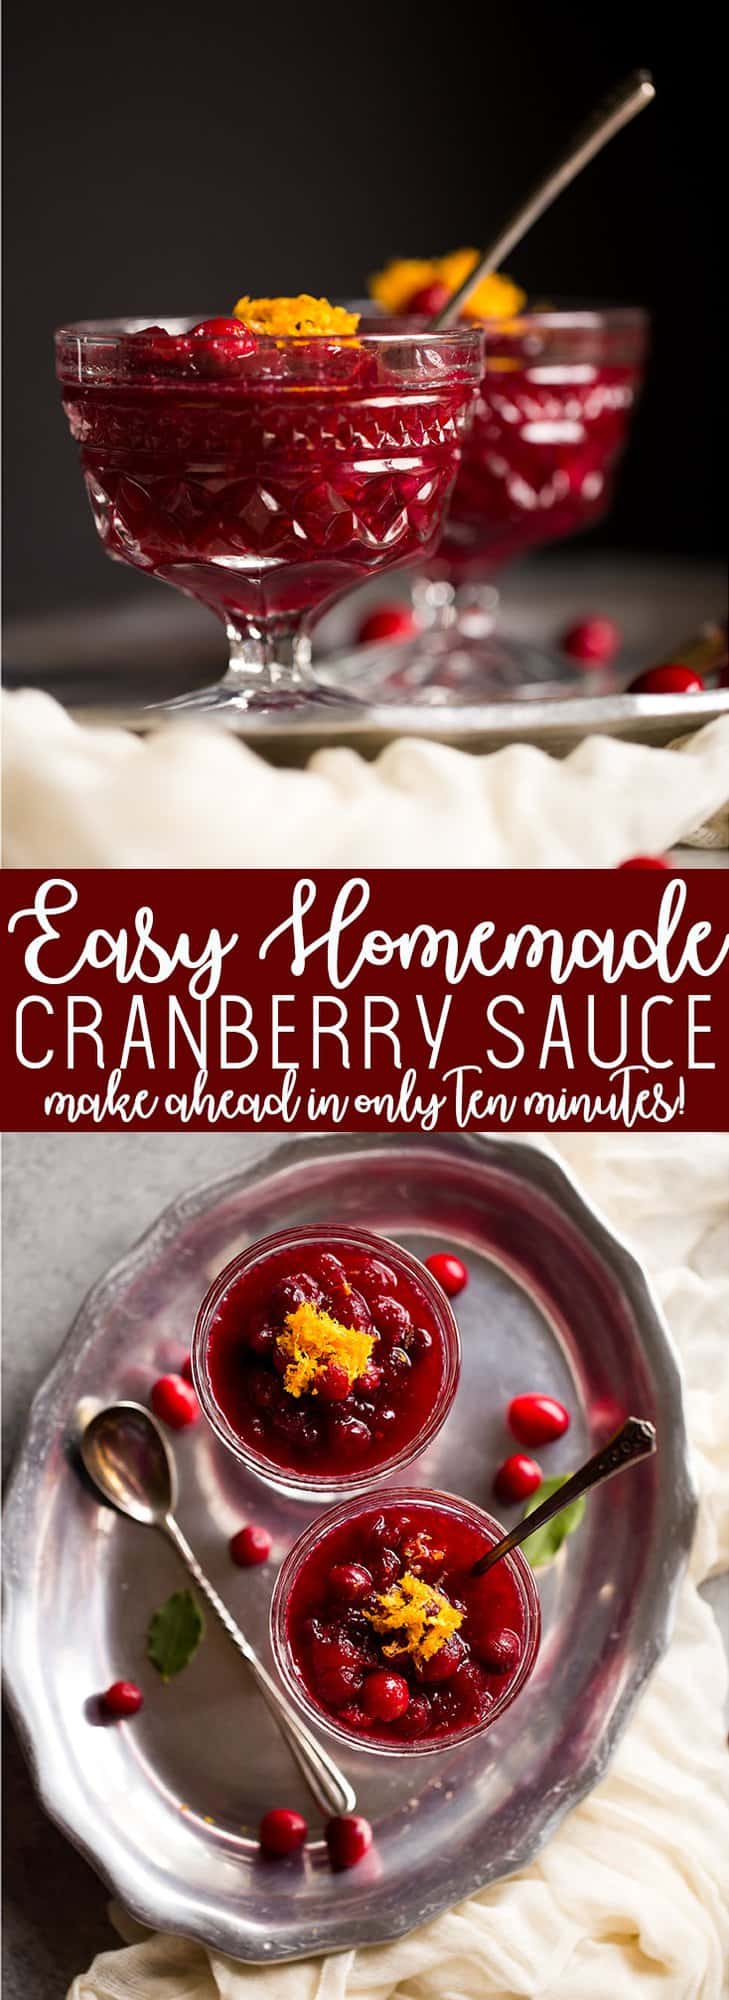 This easy and quick recipe makes the best classic cranberry sauce! This make ahead cranberry sauce recipe has orange zest for an extra zing - you will never go back to canned cranberry sauce again! |easy cranberry sauce recipe | Cranberry sauce for Thanksgiving | Make ahead cranberry sauce | Best cranberry sauce recipe | Cranberry sauce with orange zest | 3 ingredient cranberry sauce